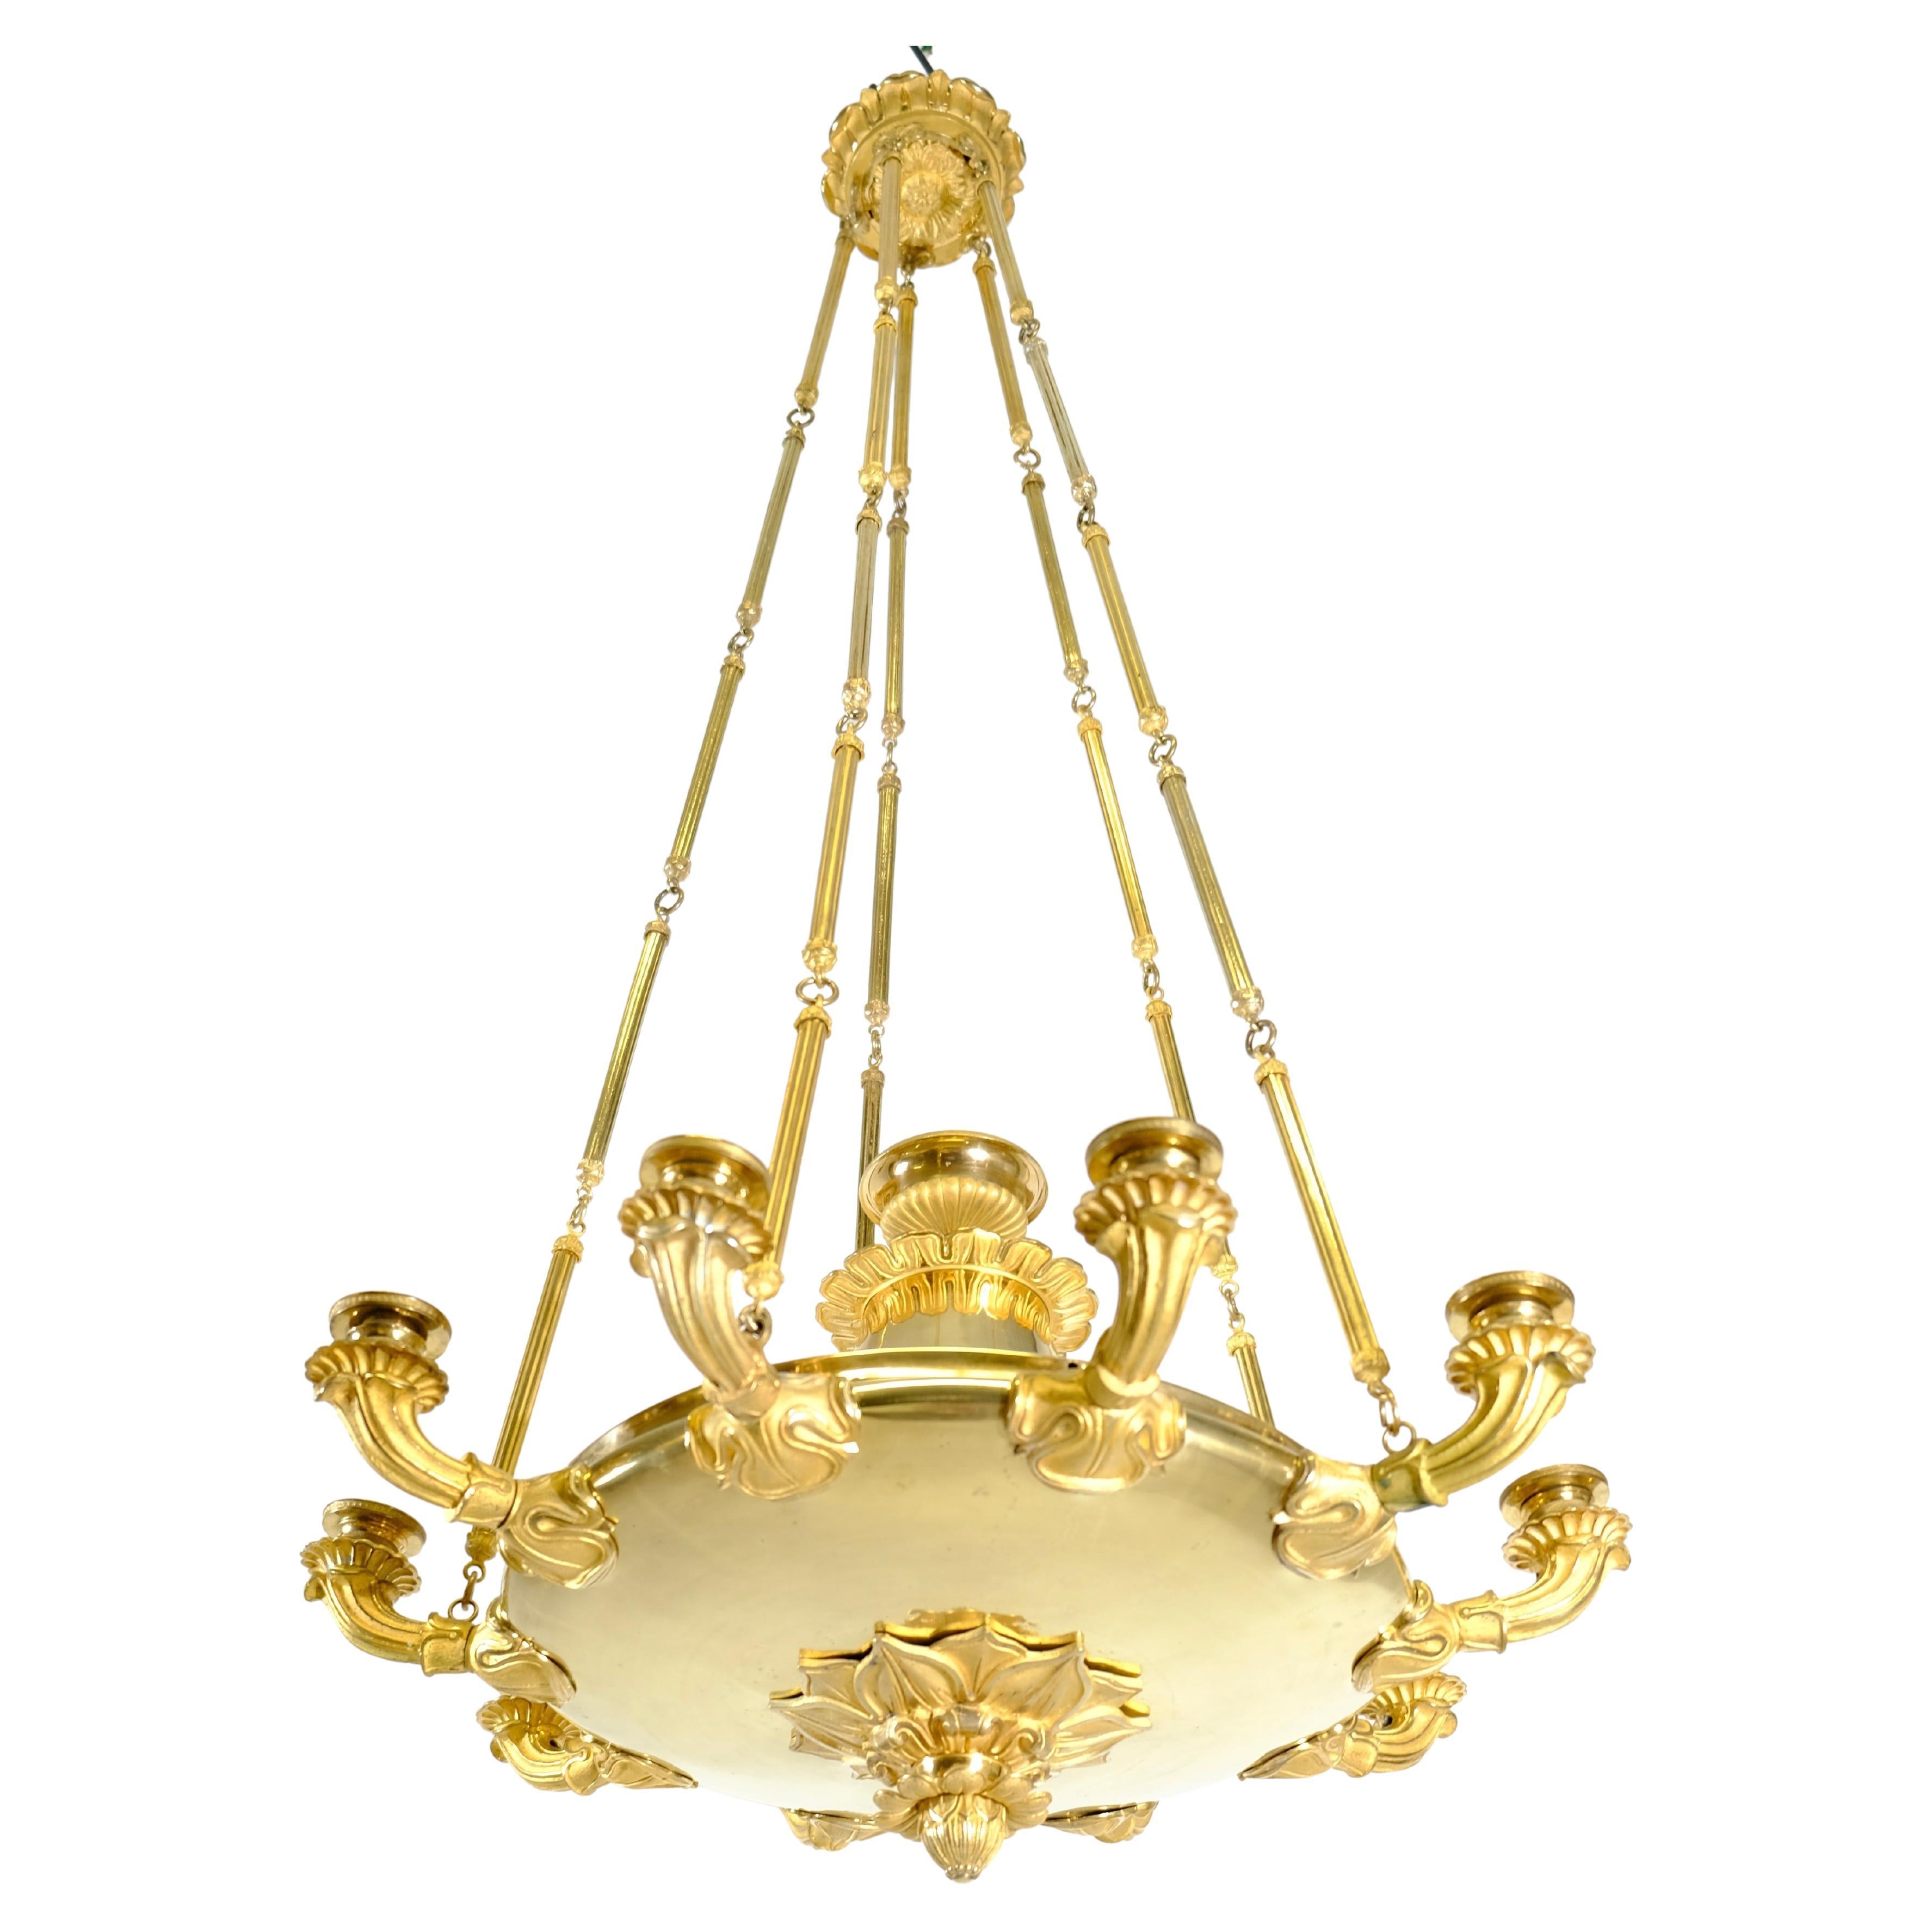 Large Empire Chandelier with Ten Candleholders in great condition. Ca 1820.